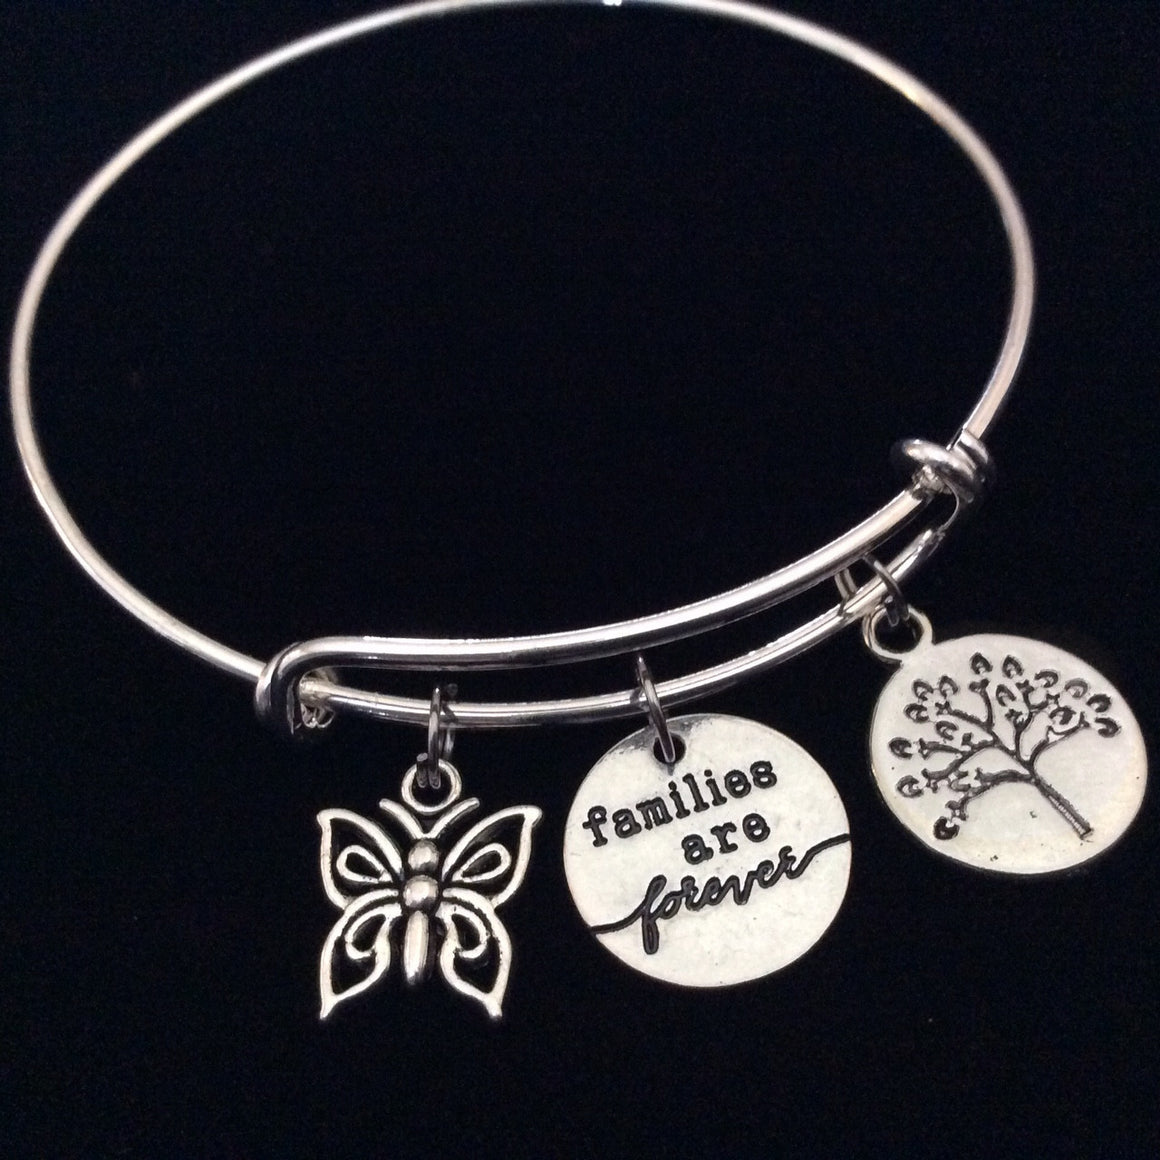 Families are Forever Expandable Charm Bracelet Silver Adjustable Bangle Trendy Gift Tree of Life Butterfly